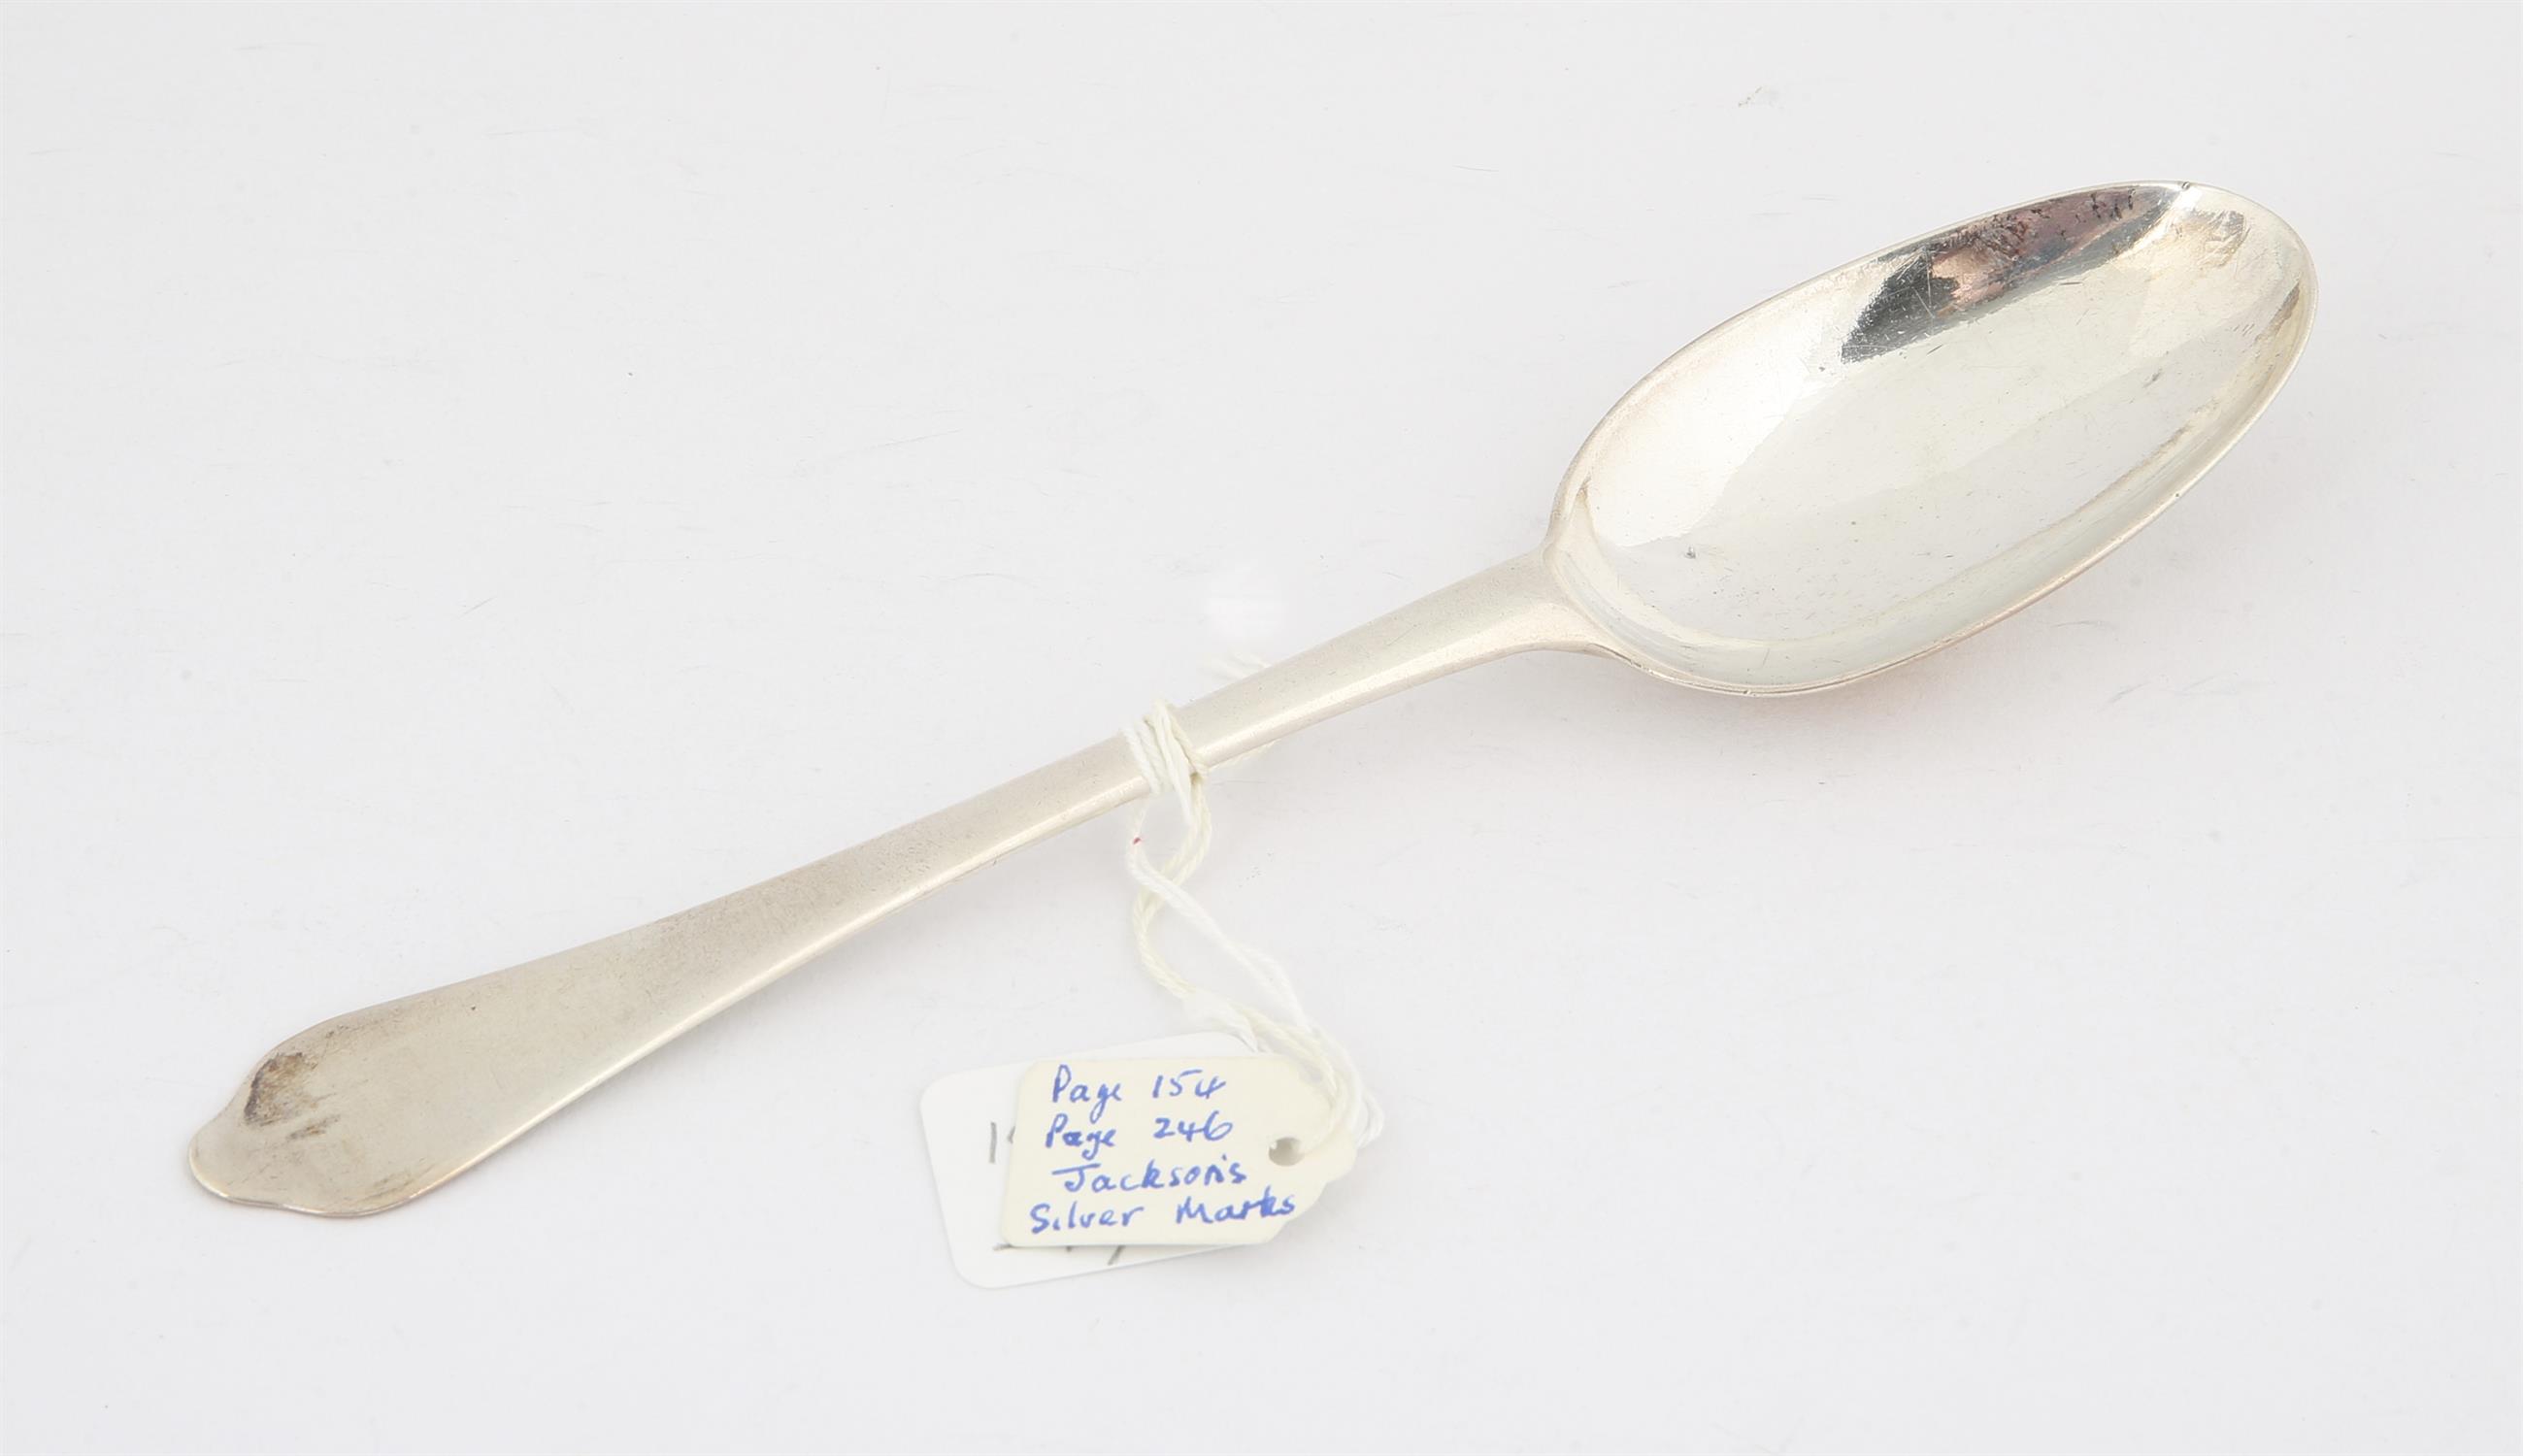 Late 17th century dog nose silver spoon, possibly by Benjamin Watts SILVER COLLECTION OF SIR RAY